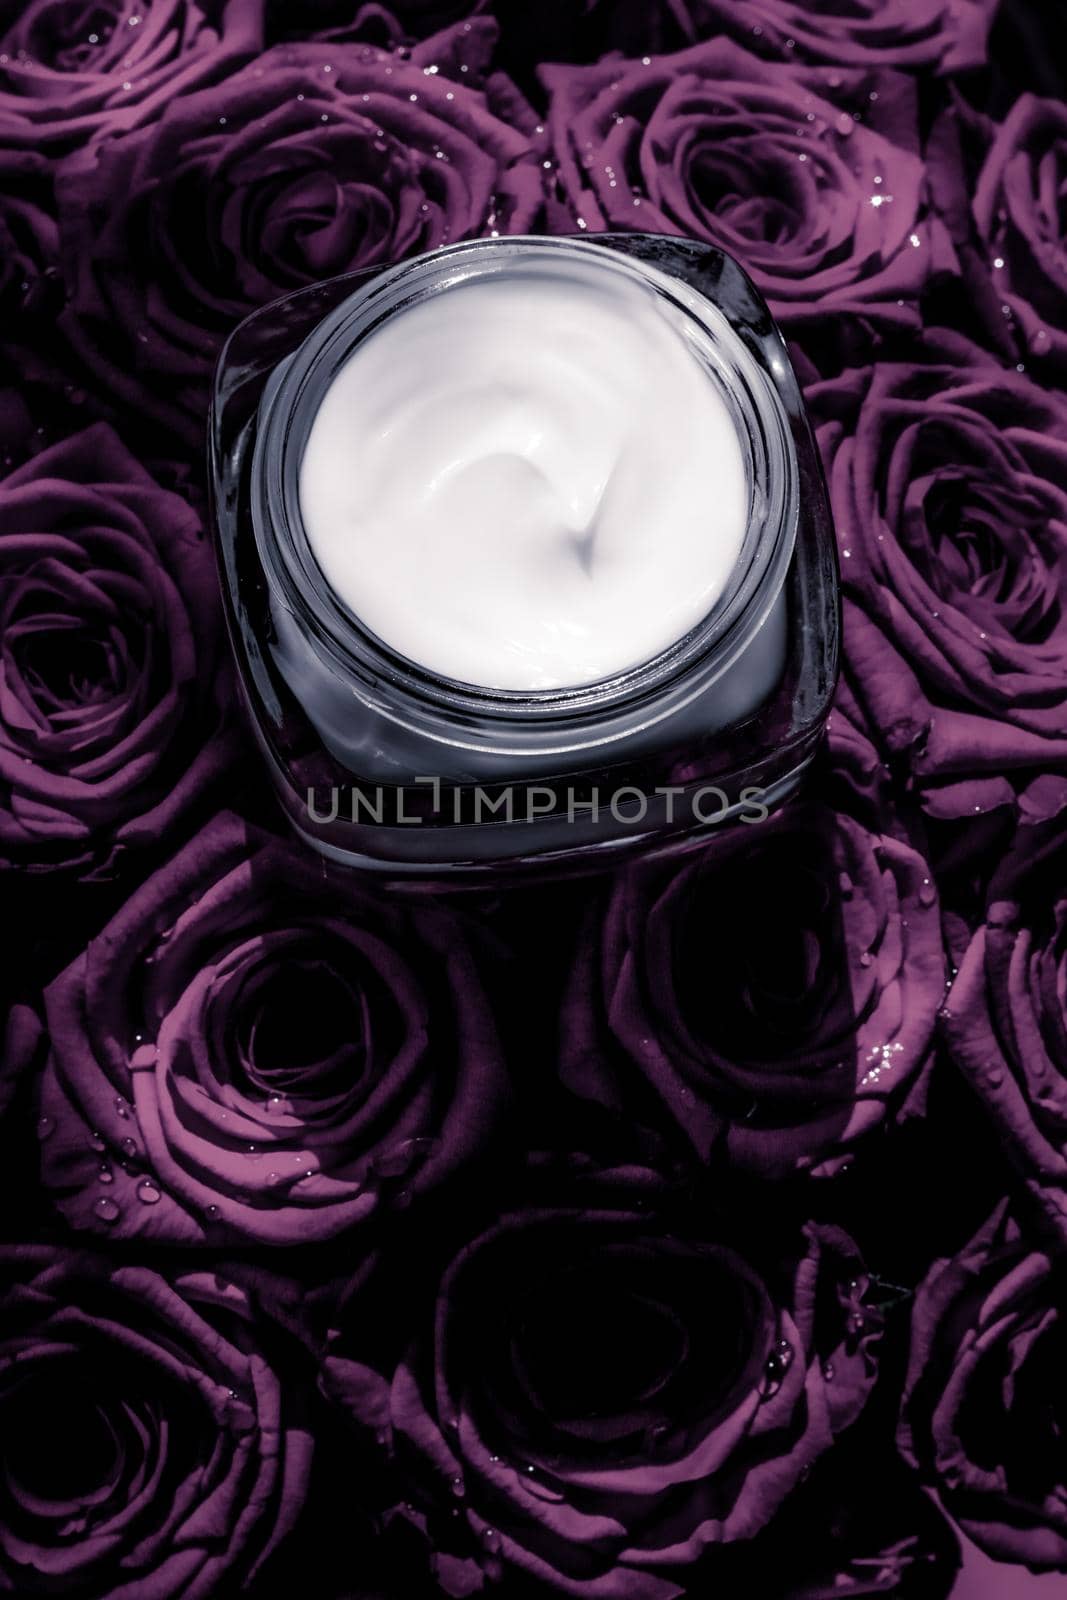 Face cream skin moisturizer on purple roses flowers, luxury skincare cosmetic product on floral background as beauty brand holiday flatlay design by Anneleven